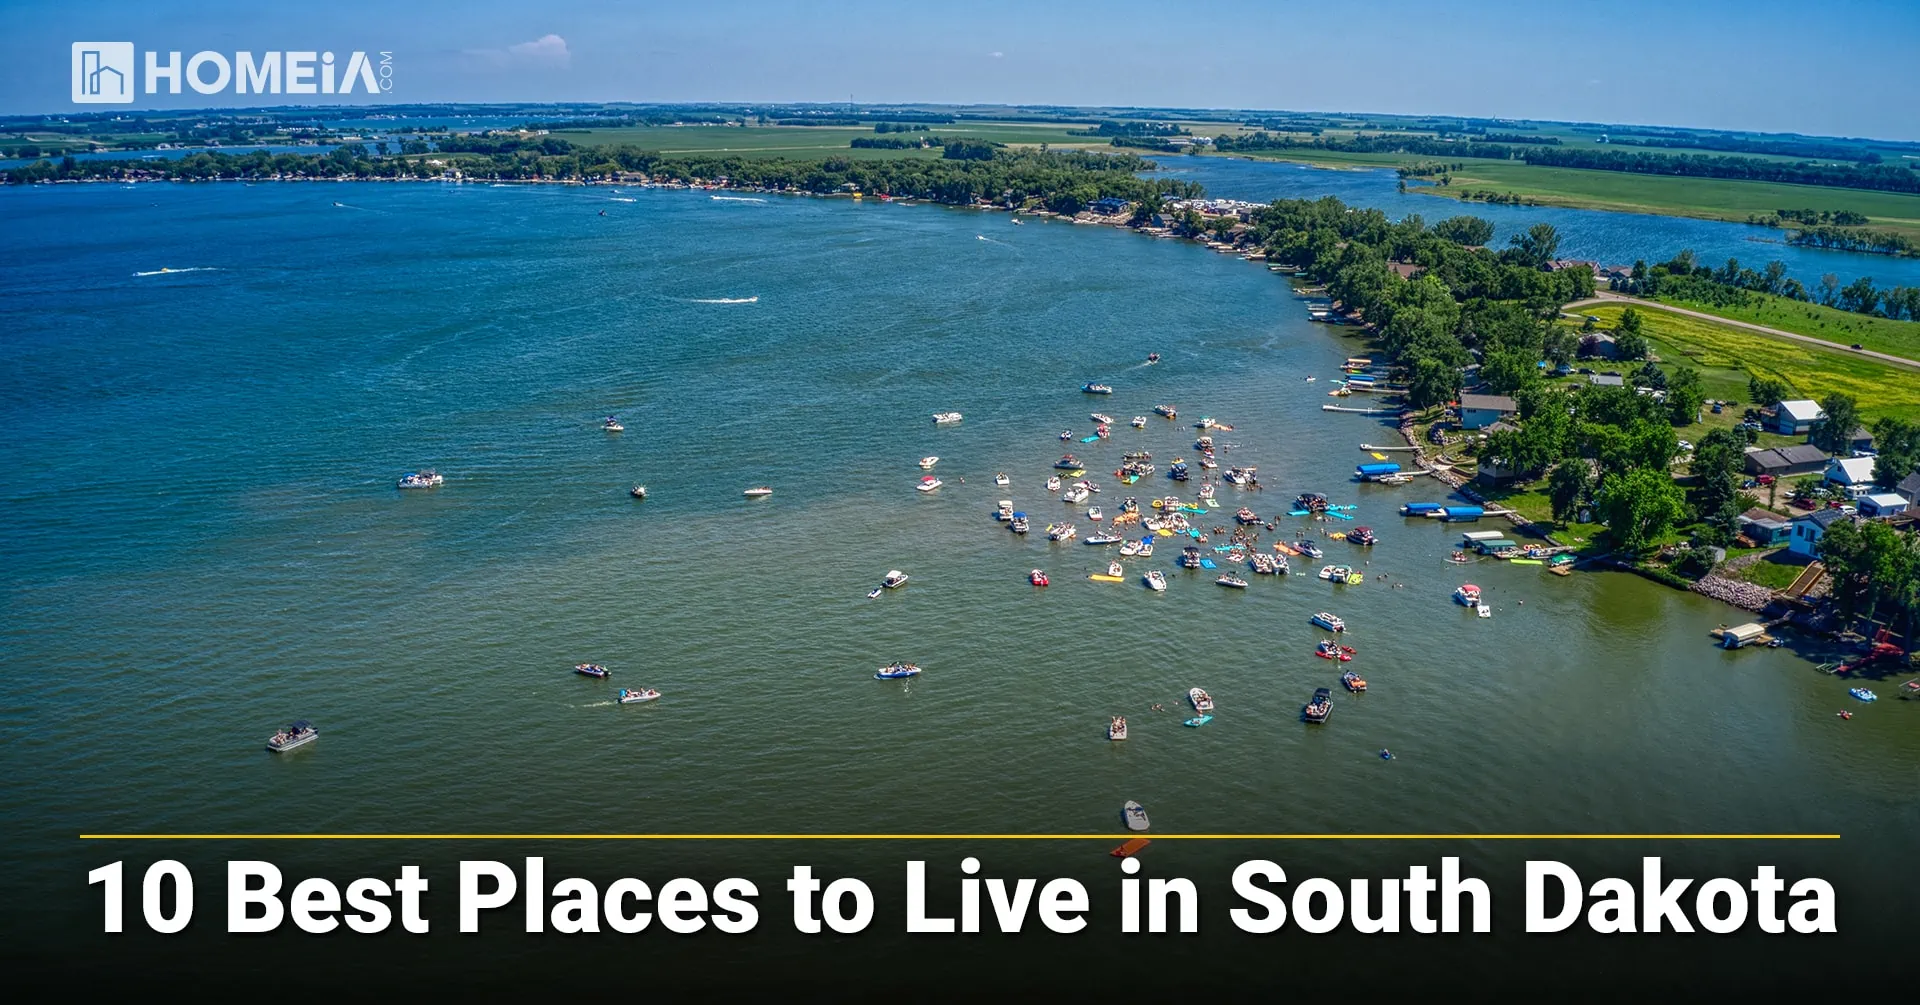 10 Best Places to Live in South Dakota